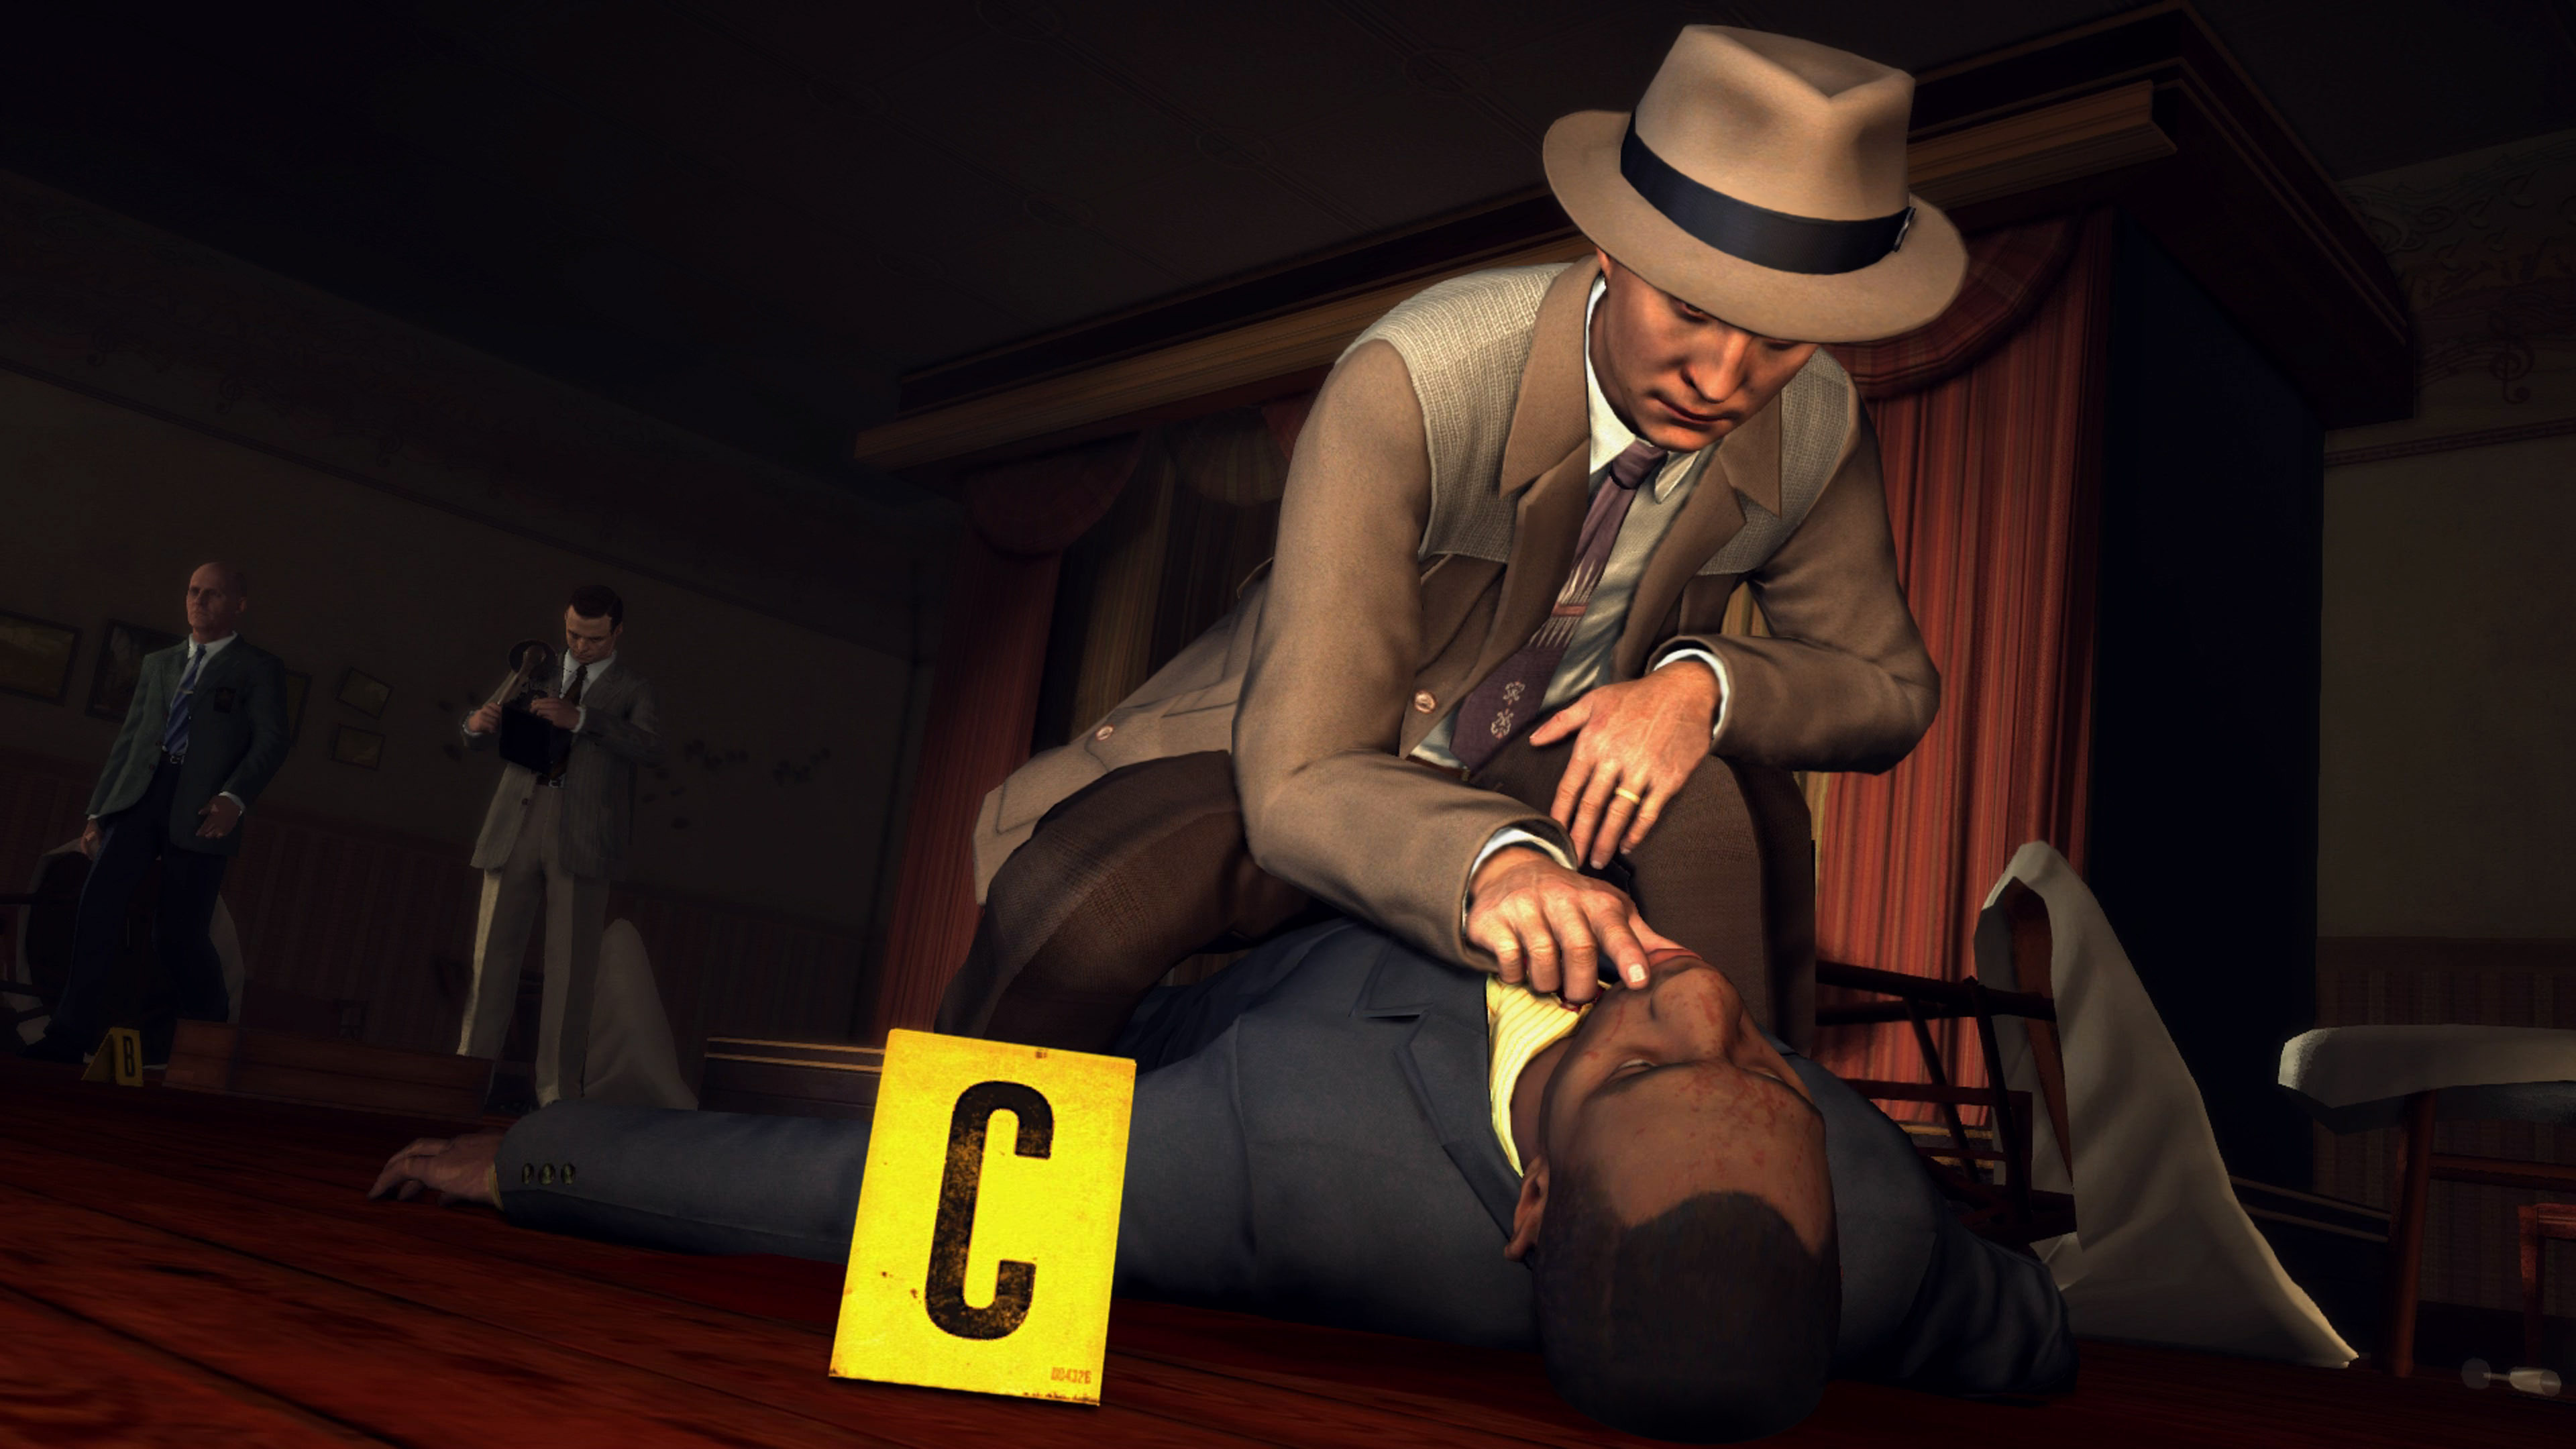 L.A. Noire On Switch And VR Offers A More Personal Detective Game.